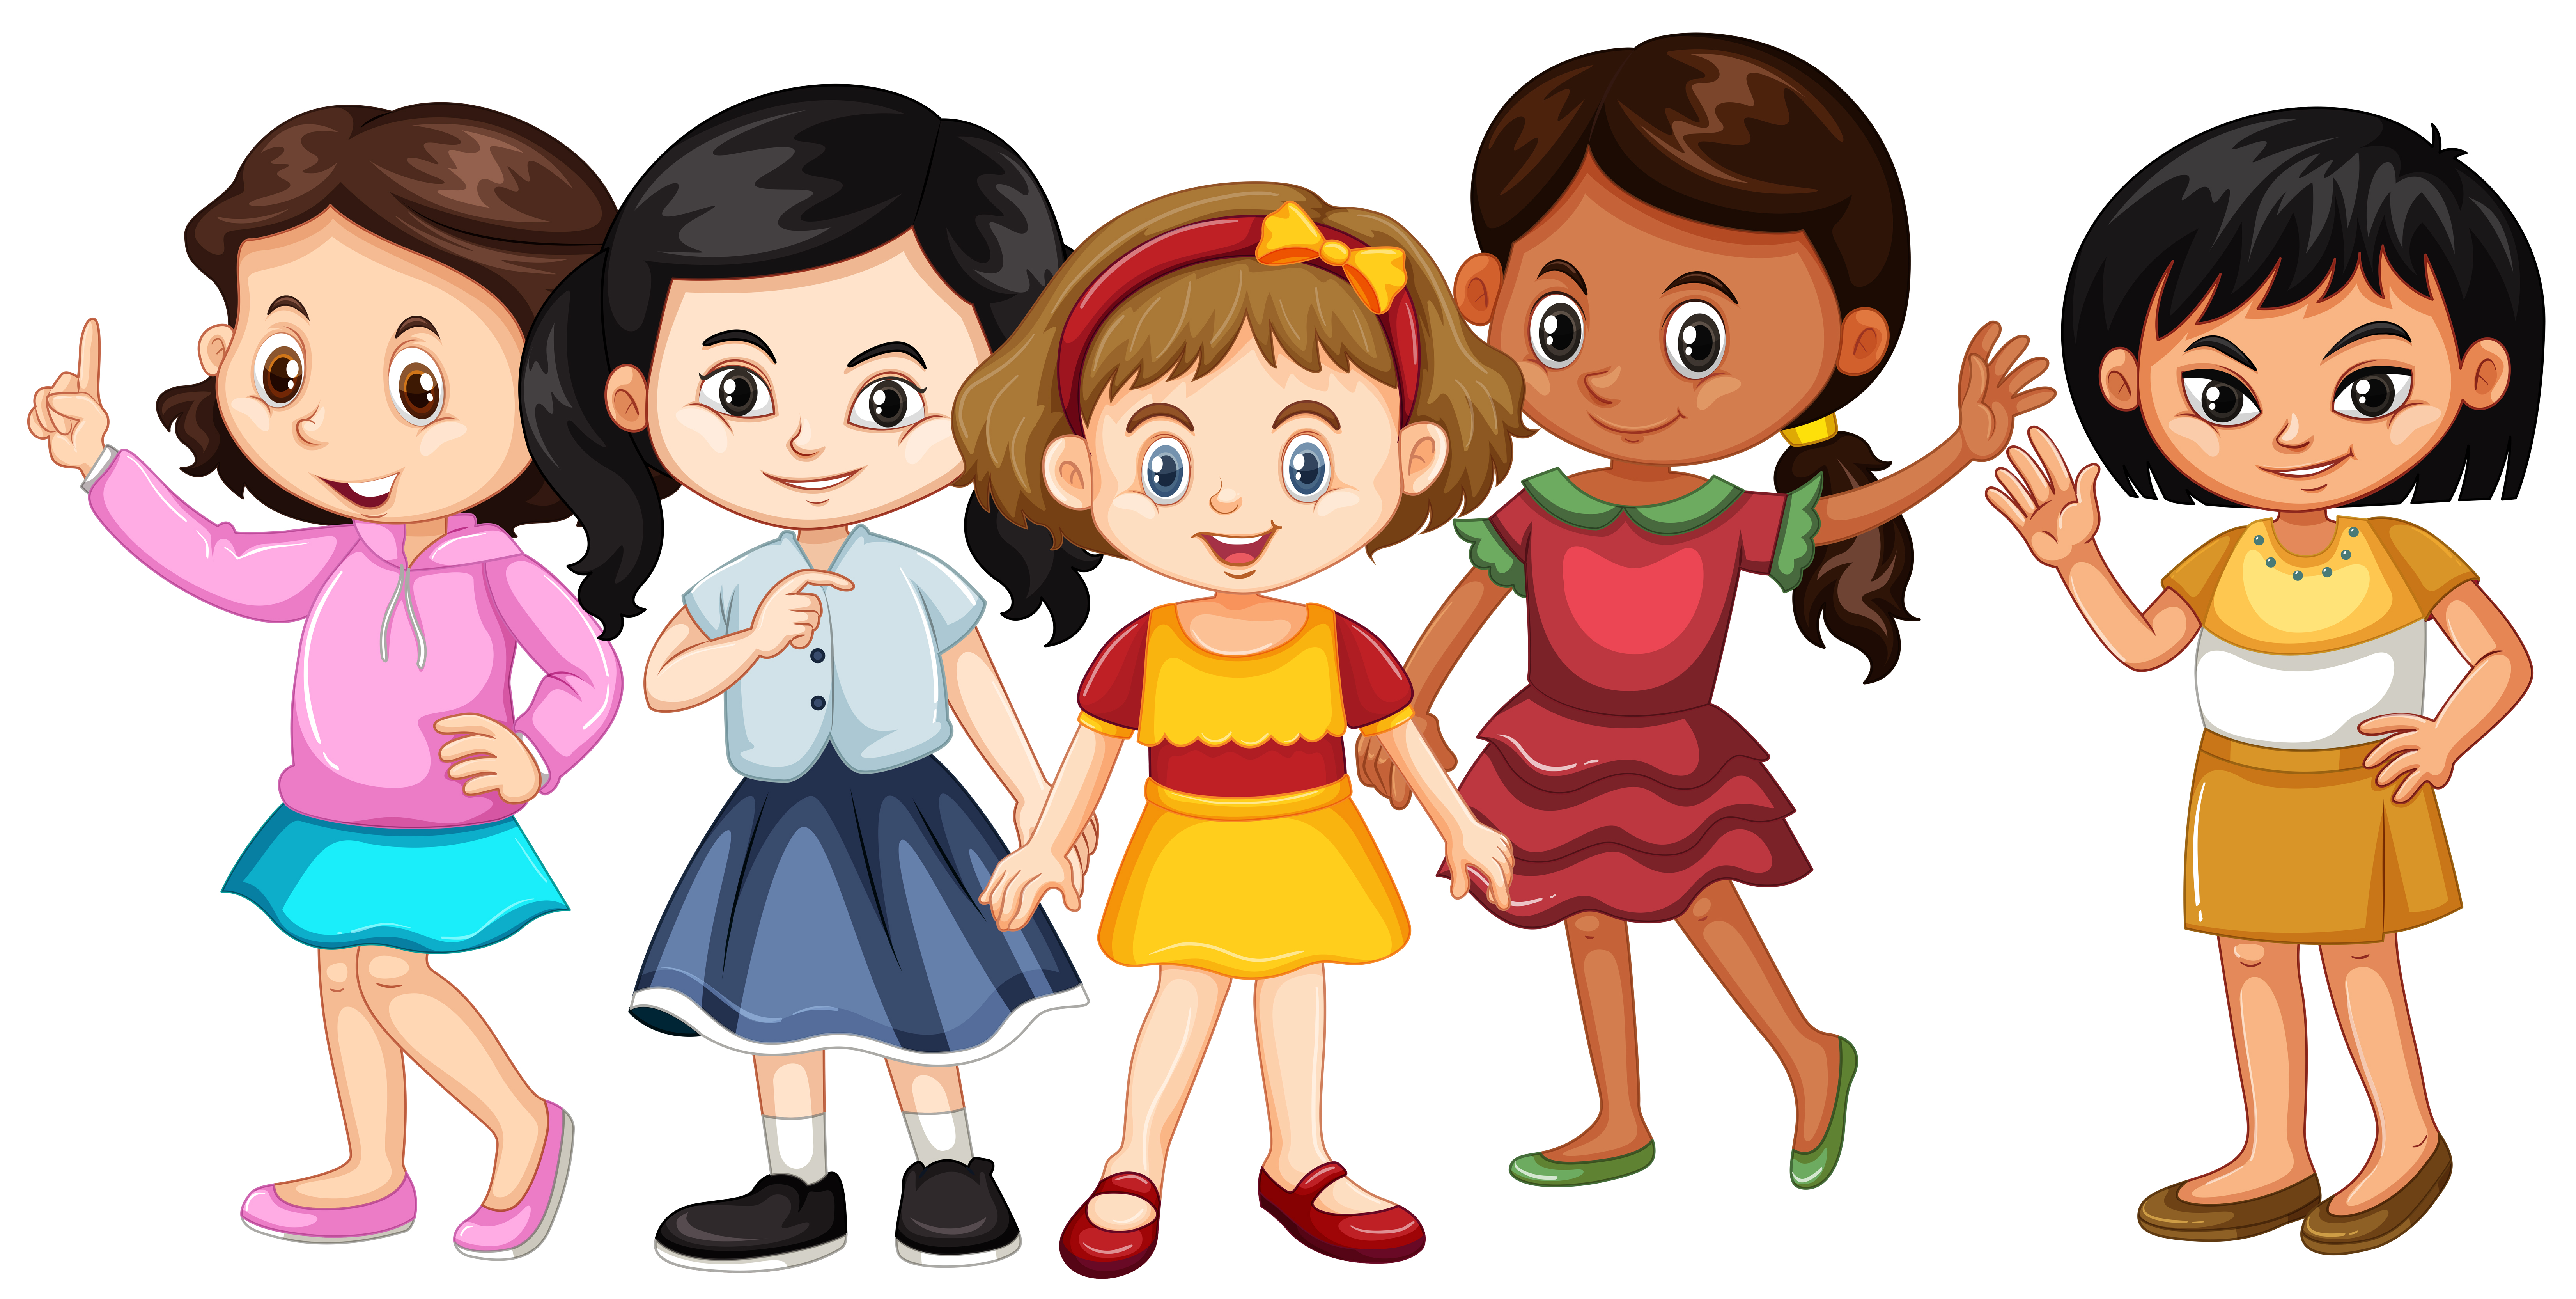  Five  girls  with happy faces Download Free Vectors 